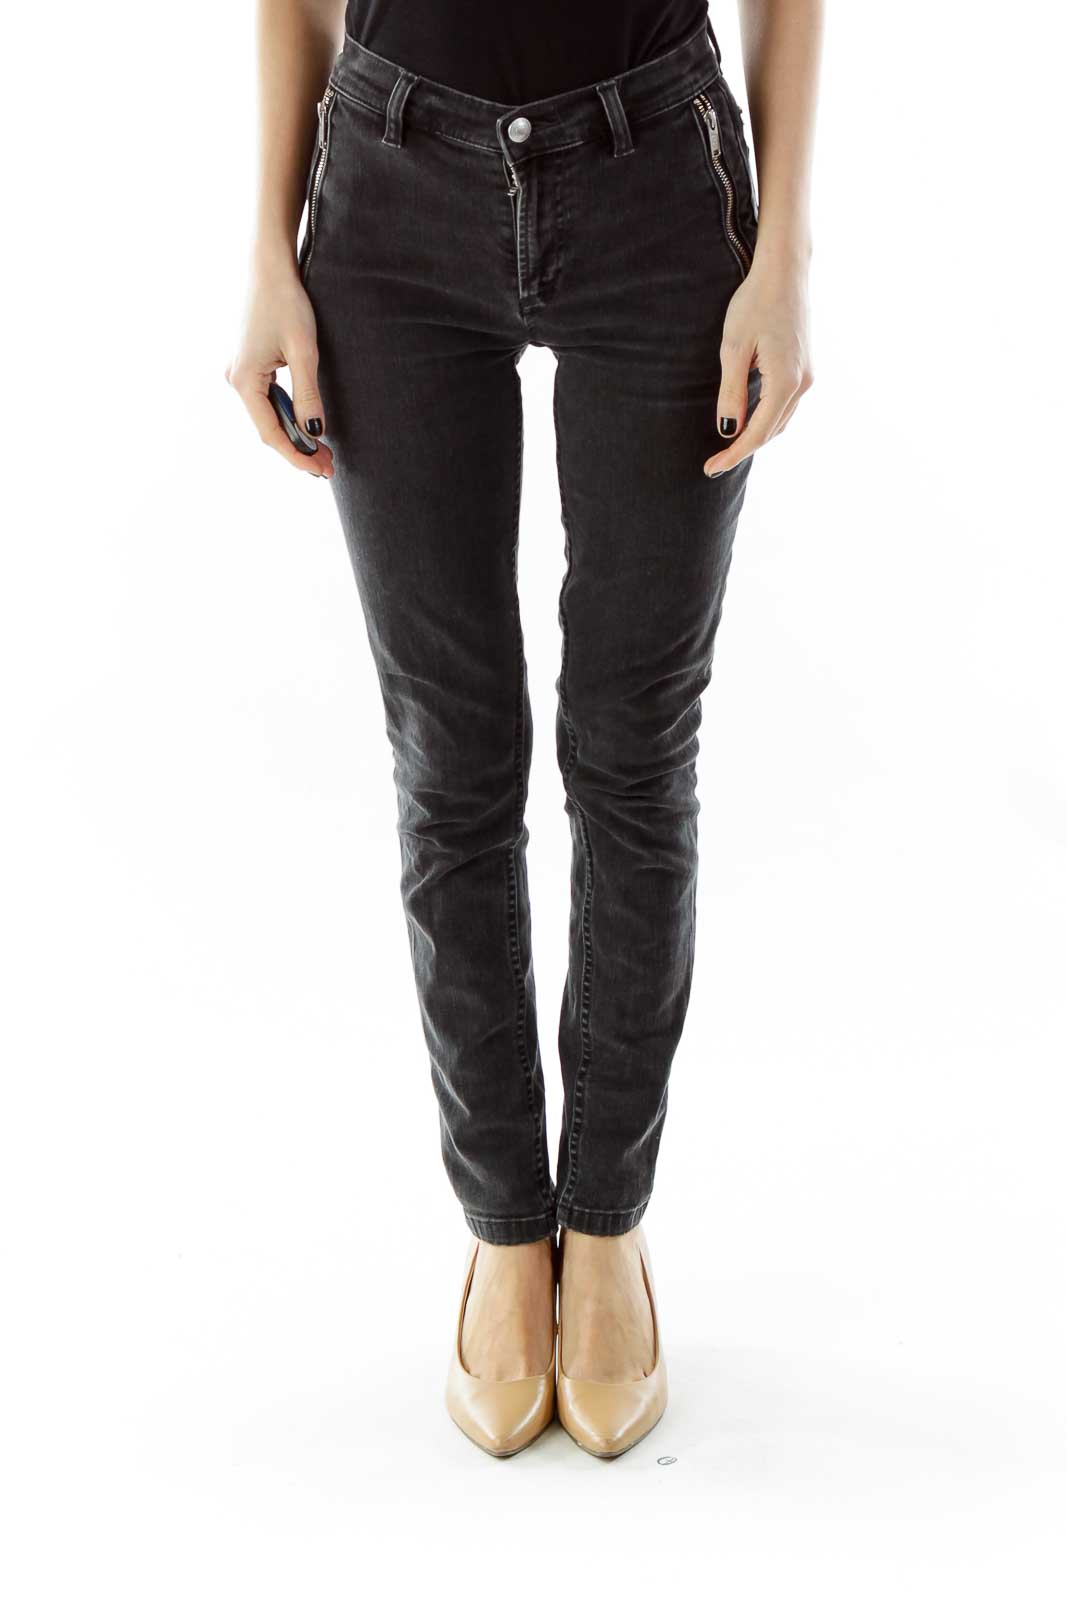 Black Zippered Skinny Jeans Front